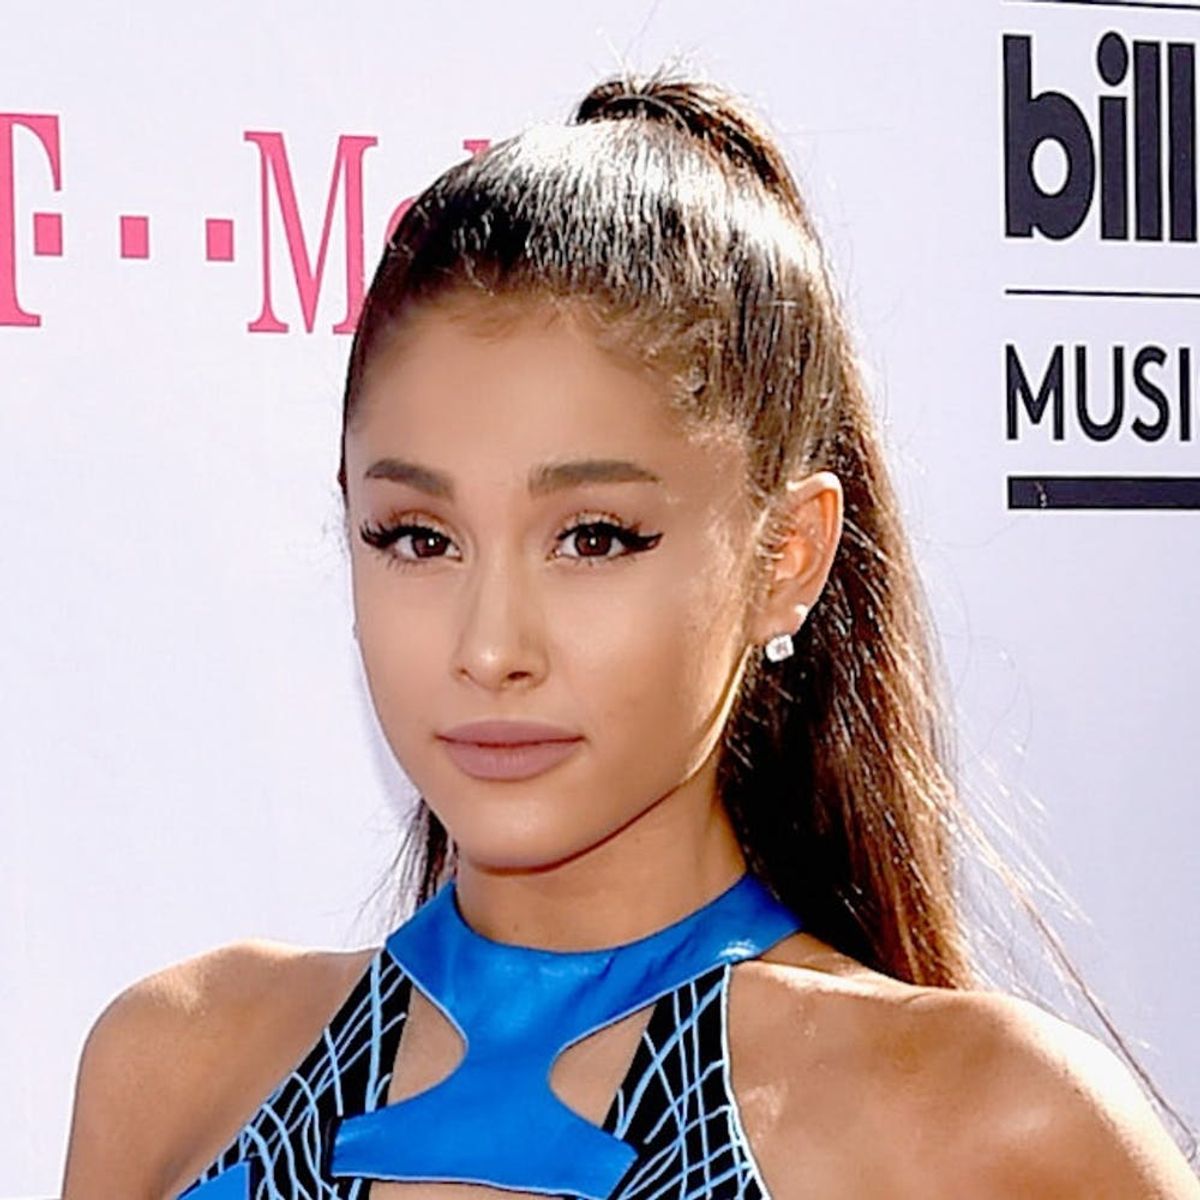 Morning Buzz: Ariana Grande Fans Have Started the #ThisIsNotYourFaultAriana Hashtag to Support Her + More